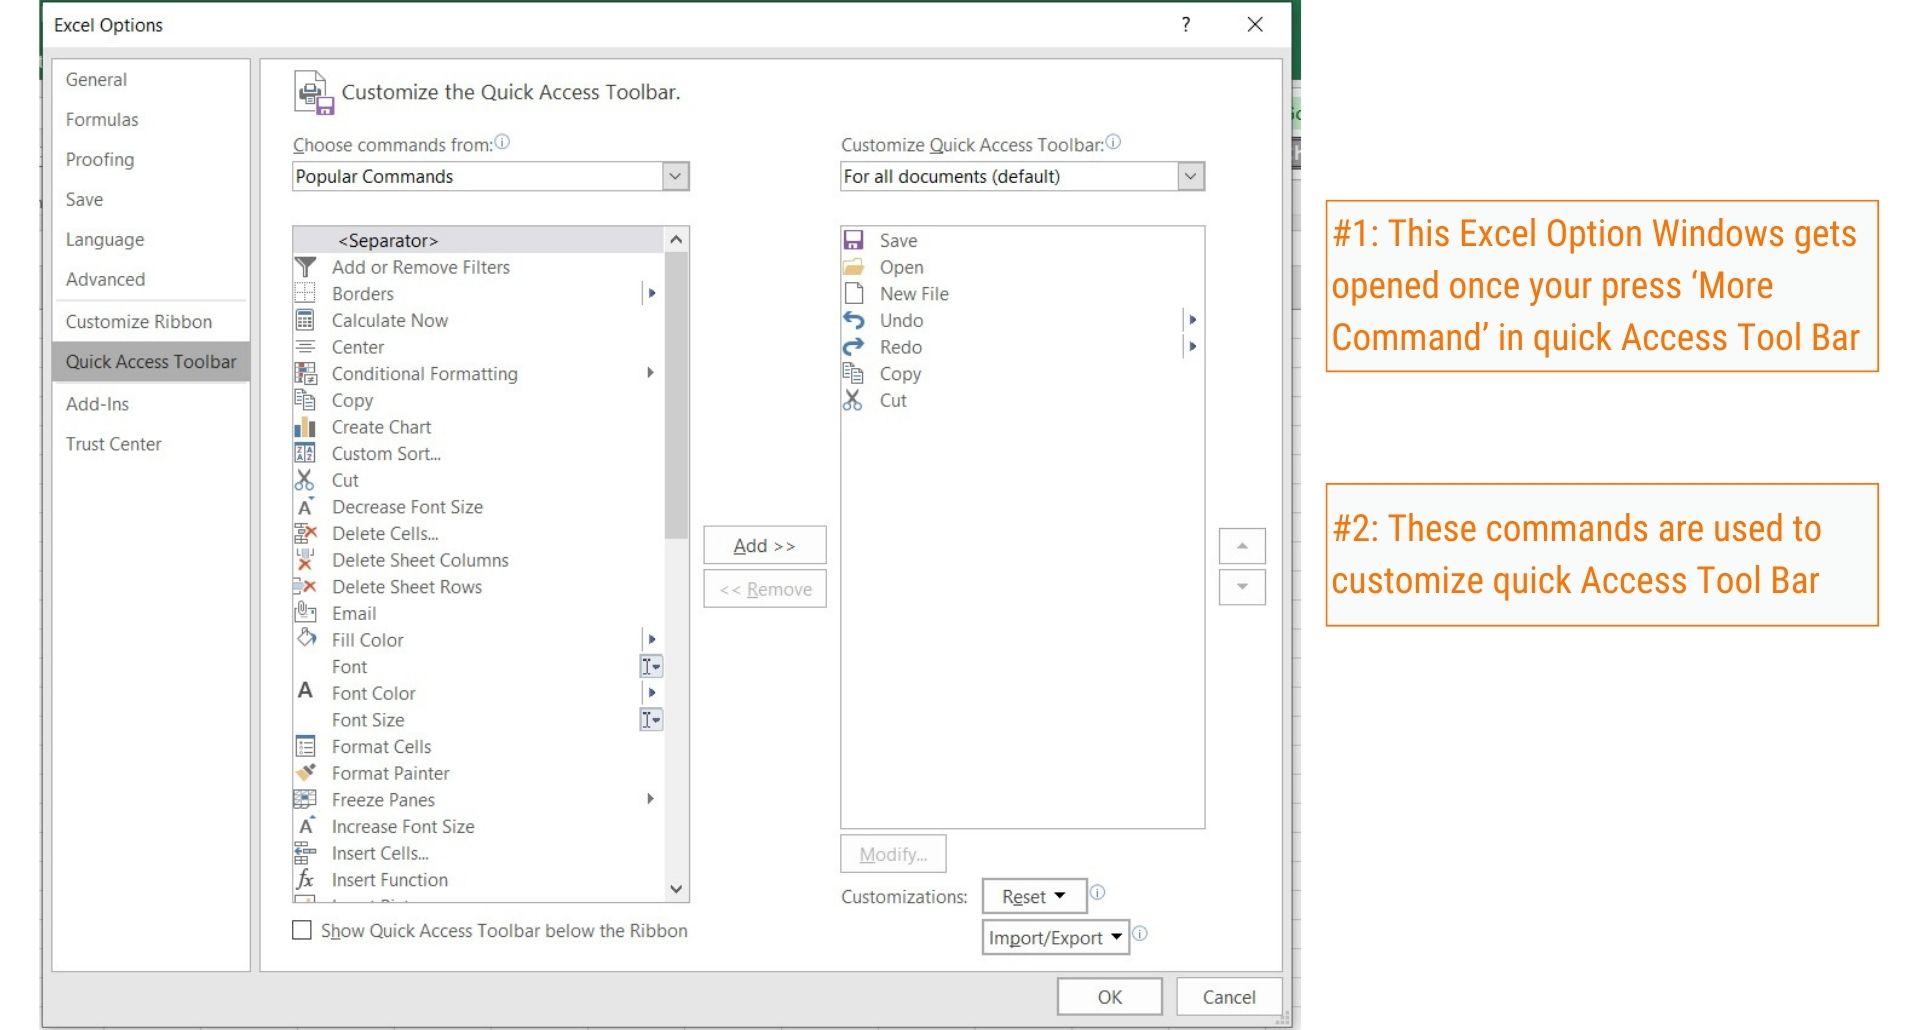 Module BE03 - List of Command to Add & Remove from Quick Access Toolbar in Excel - Excel Hippo